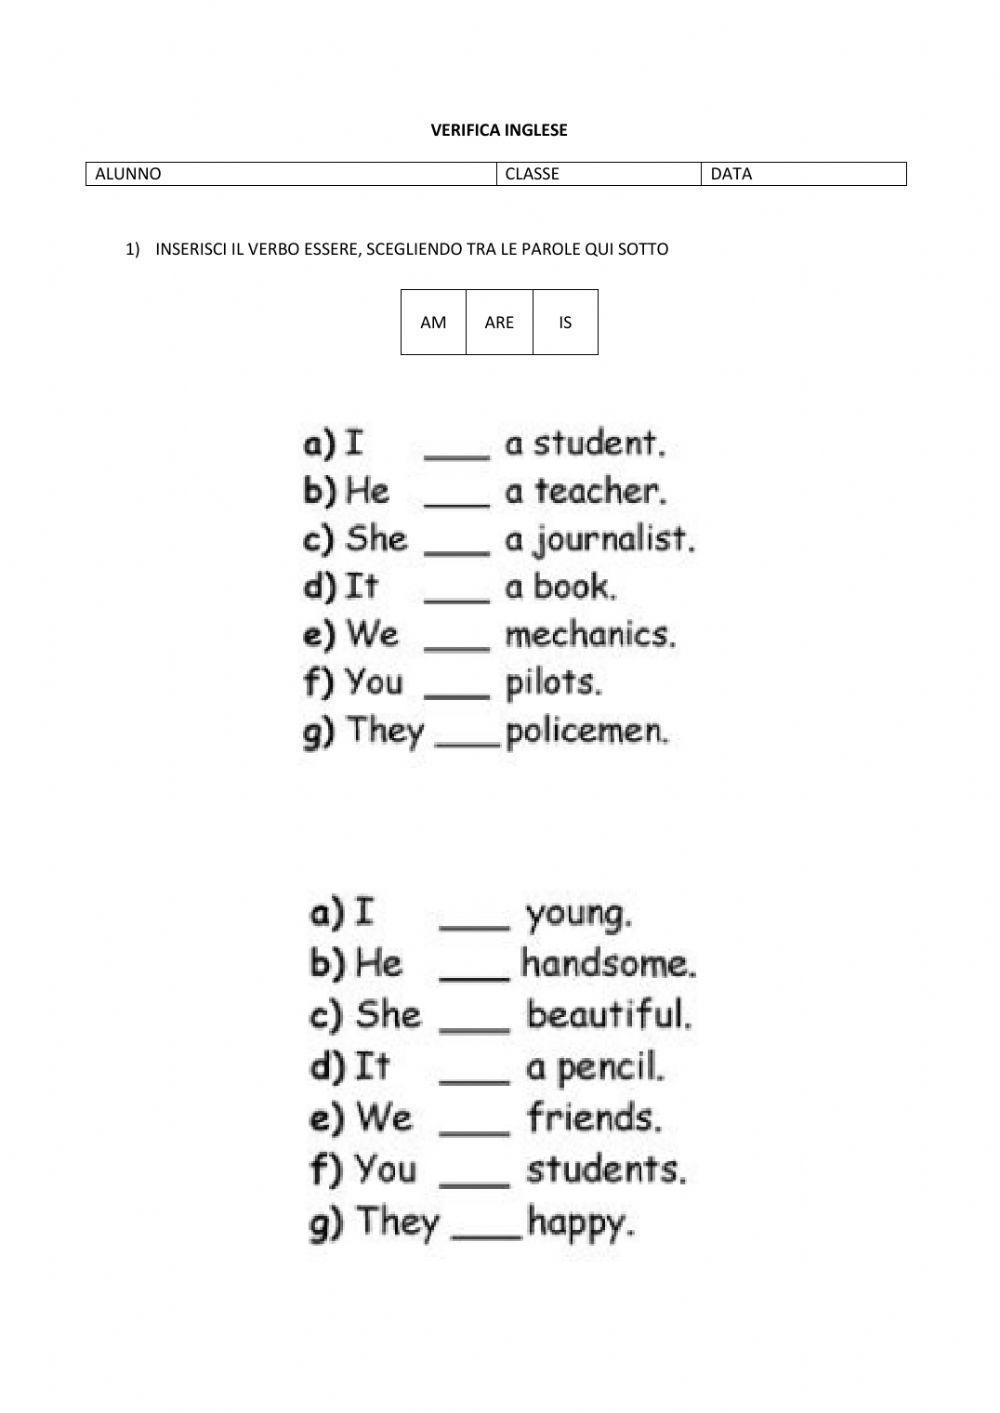 Personal pronouns and to be